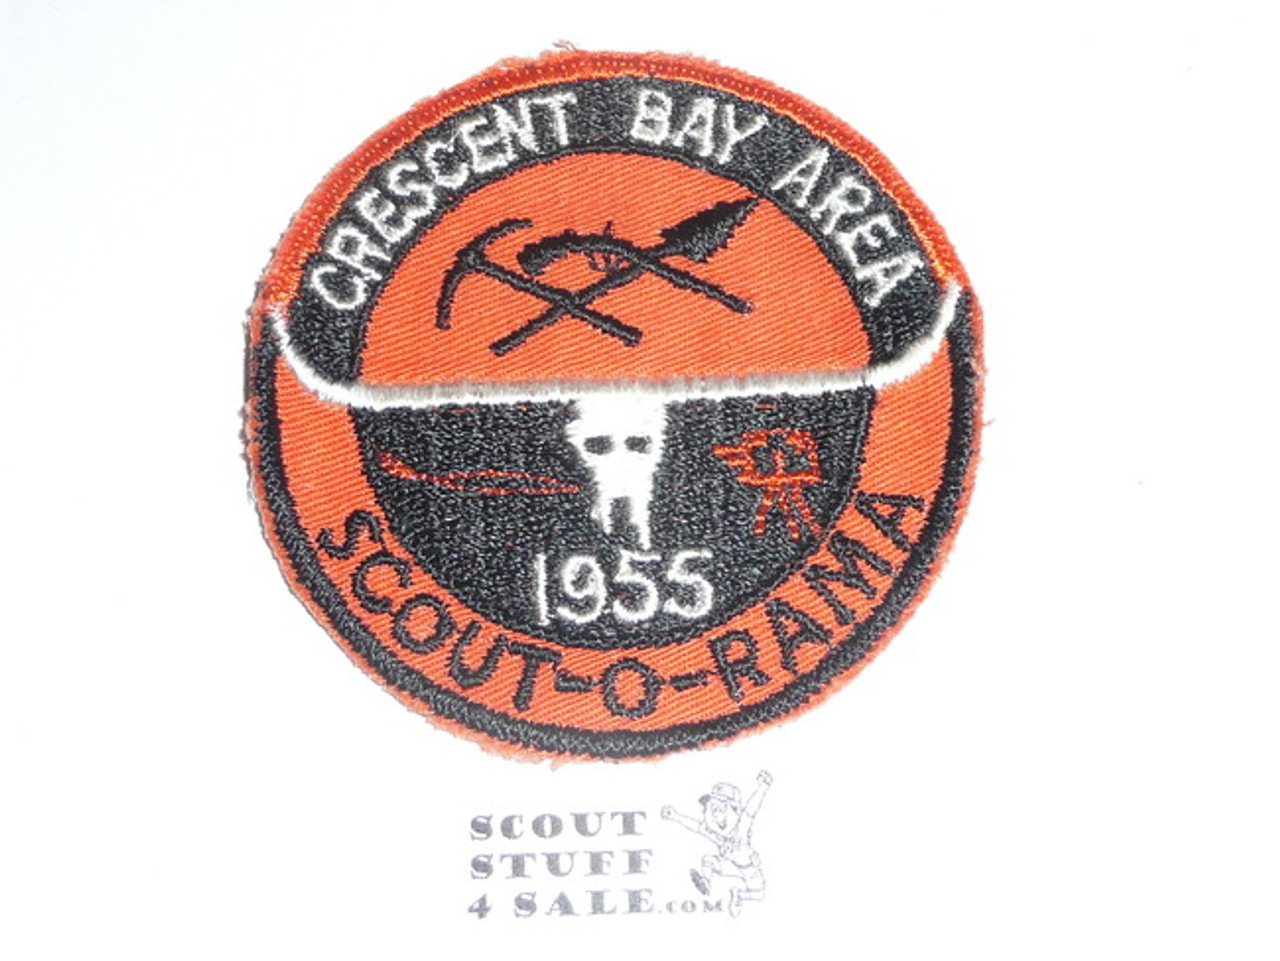 Crescent Bay Area Council, 1955 Scout-o-rama Patch